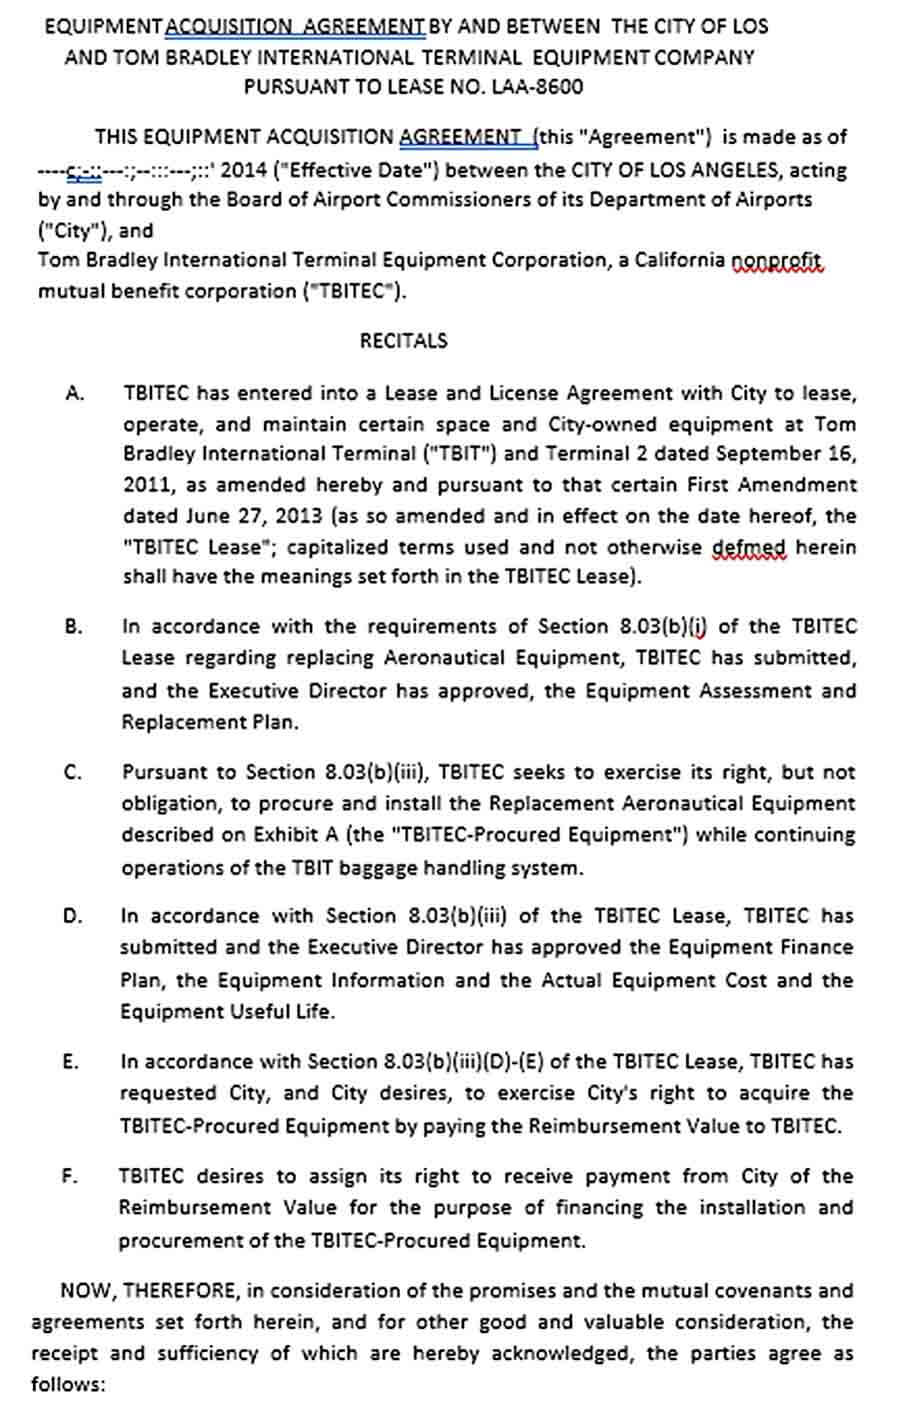 Equipment Acquistion Agreement Template